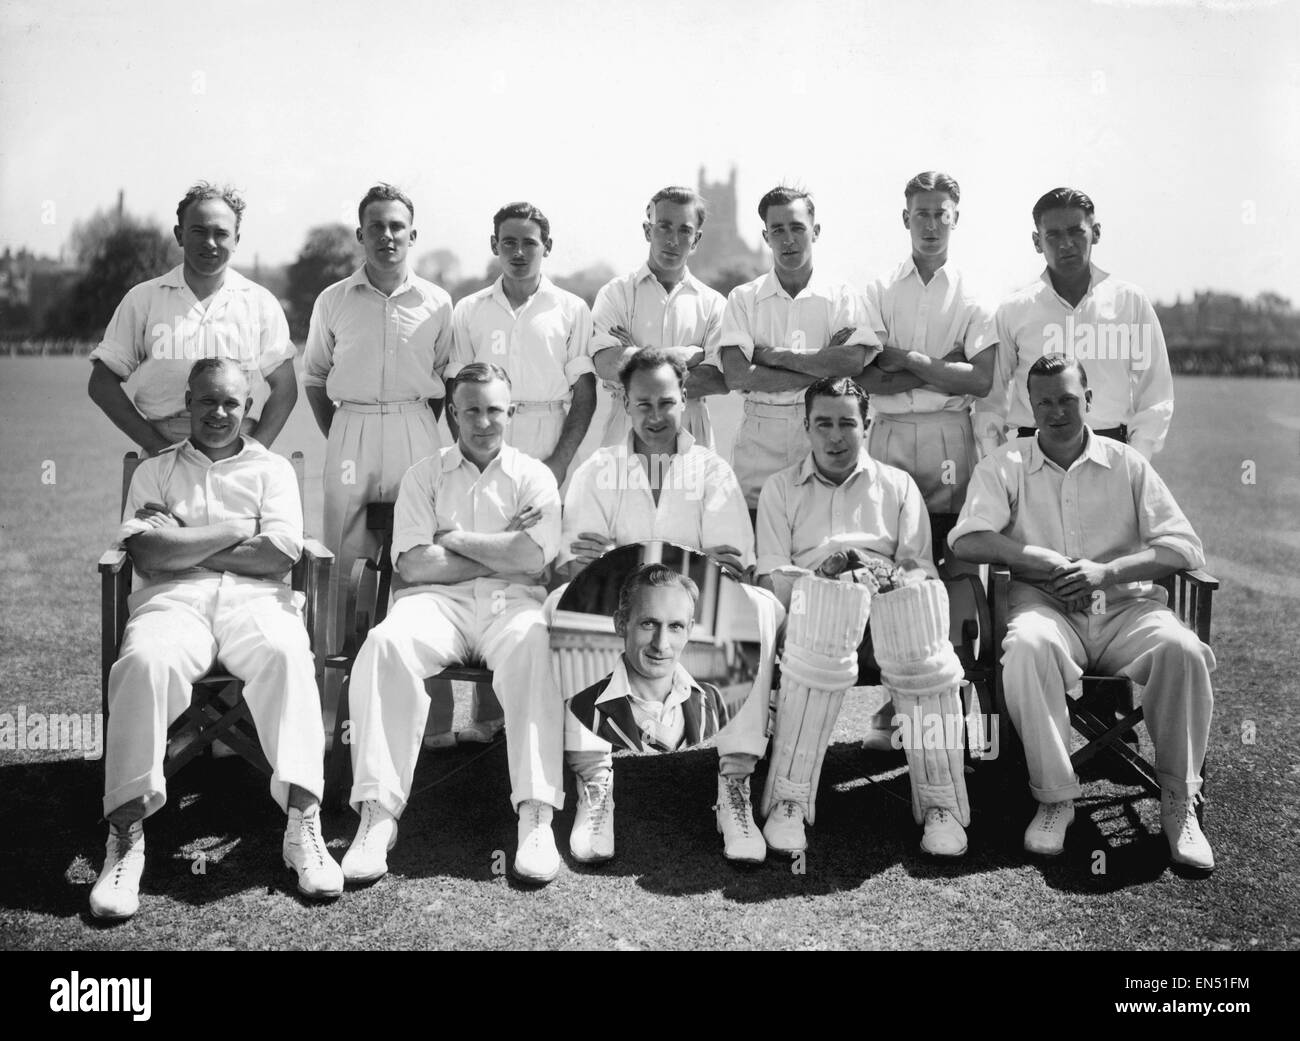 Glamorganshire County Cricket club pose for a group photograph as the County Crickey championshop goes to Wales for the first time in 75 years. They are back row left to right: W. E. Jones, P. Clift, J. Eaglestone, W.G. Parkhouse, N. Hever, G. Lavais. Fro Stock Photo